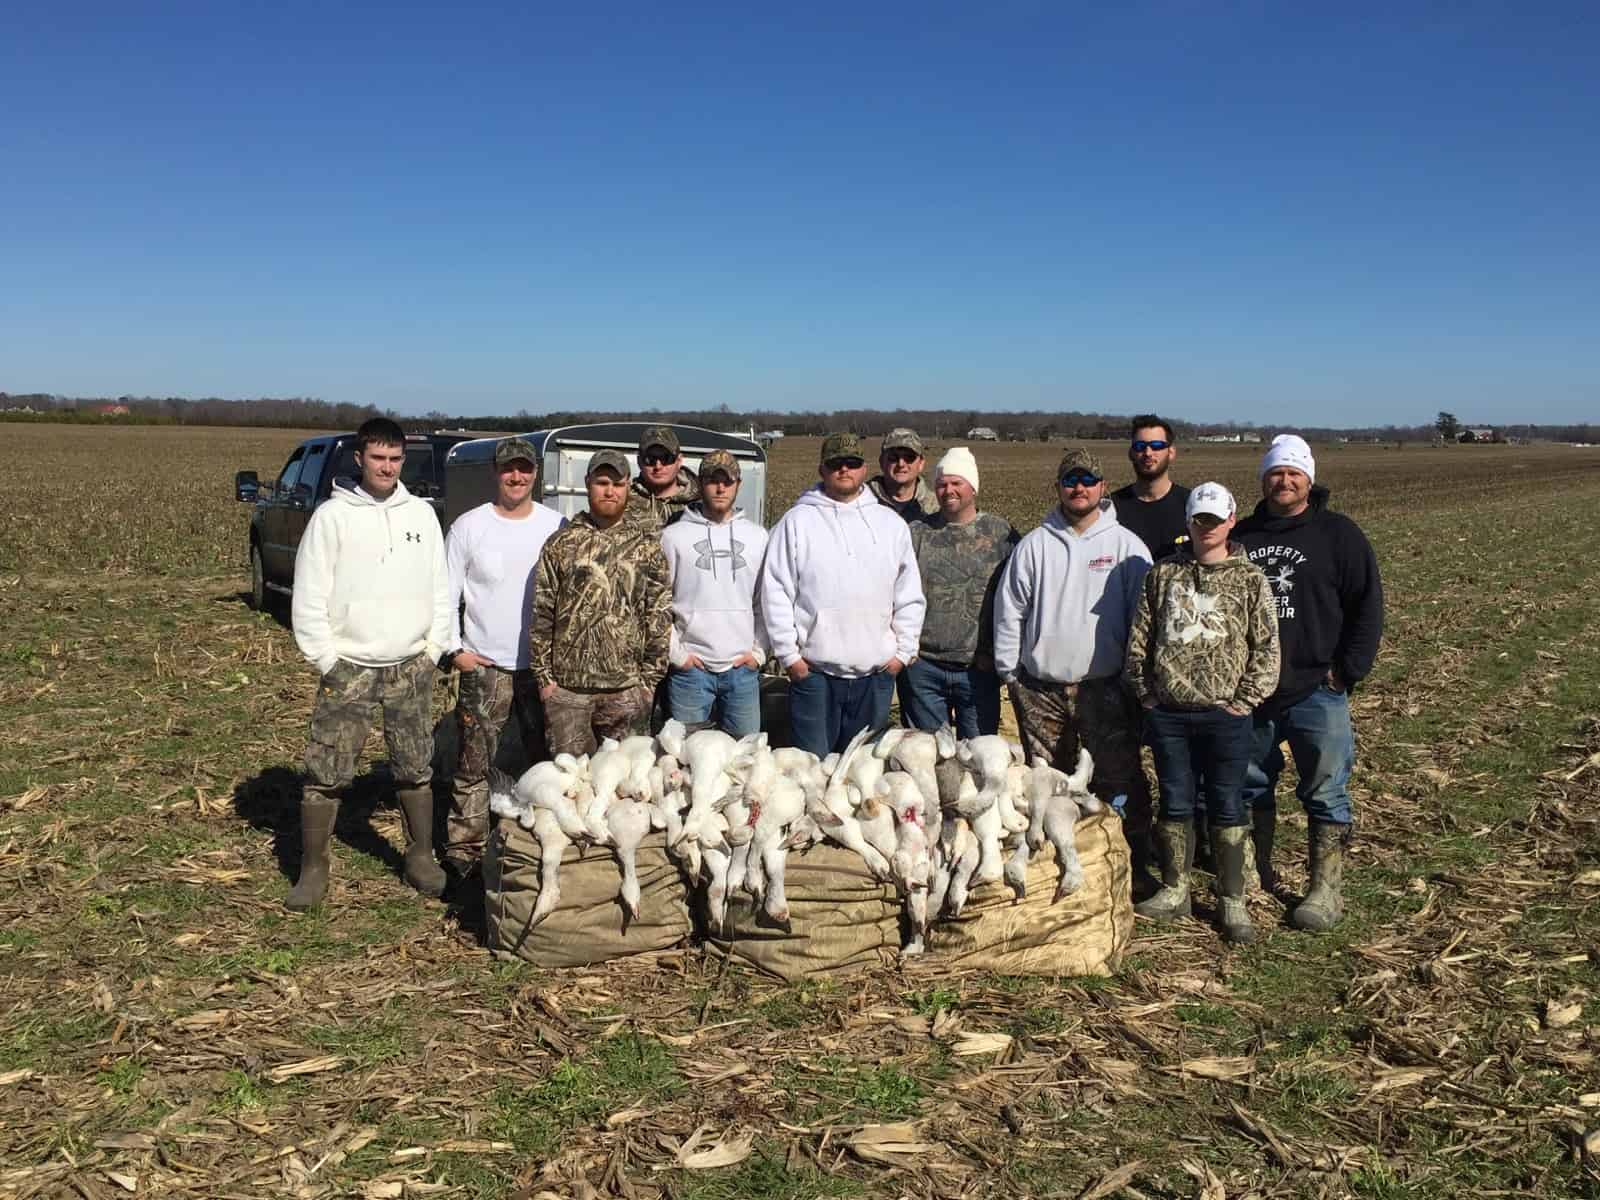 DOA Snow Goose After Hunt Results